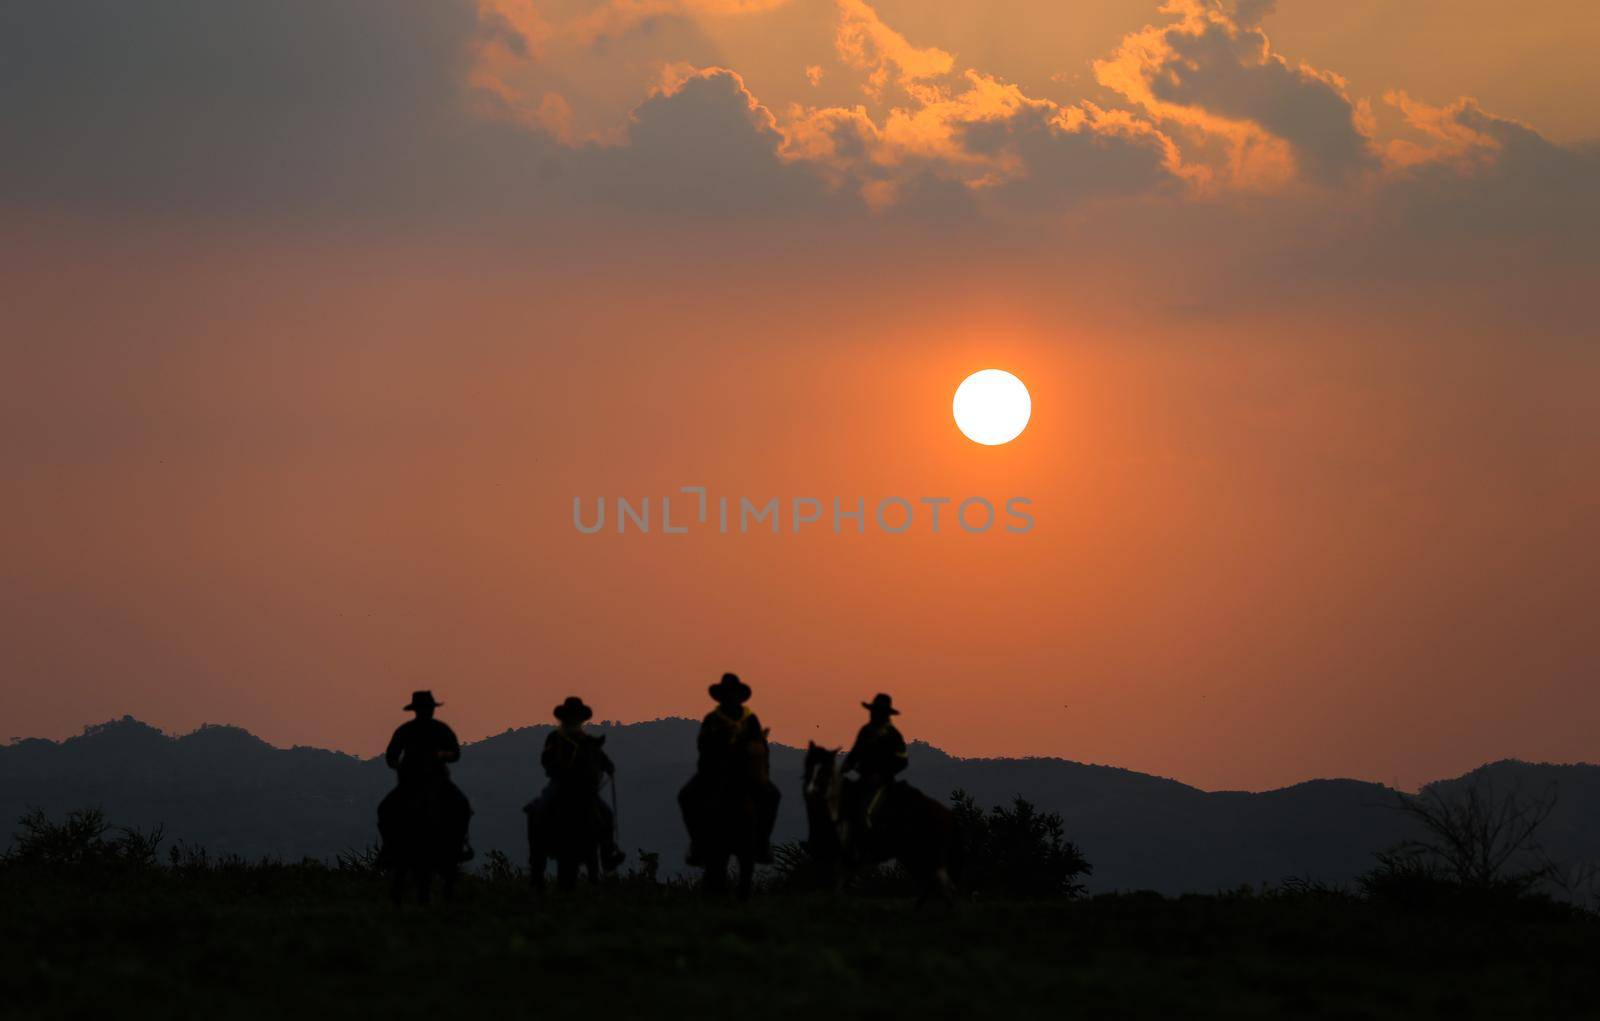 The silhouette of rider as cowboy outfit costume with a horses and a gun held in the hand against smoke and sunset background